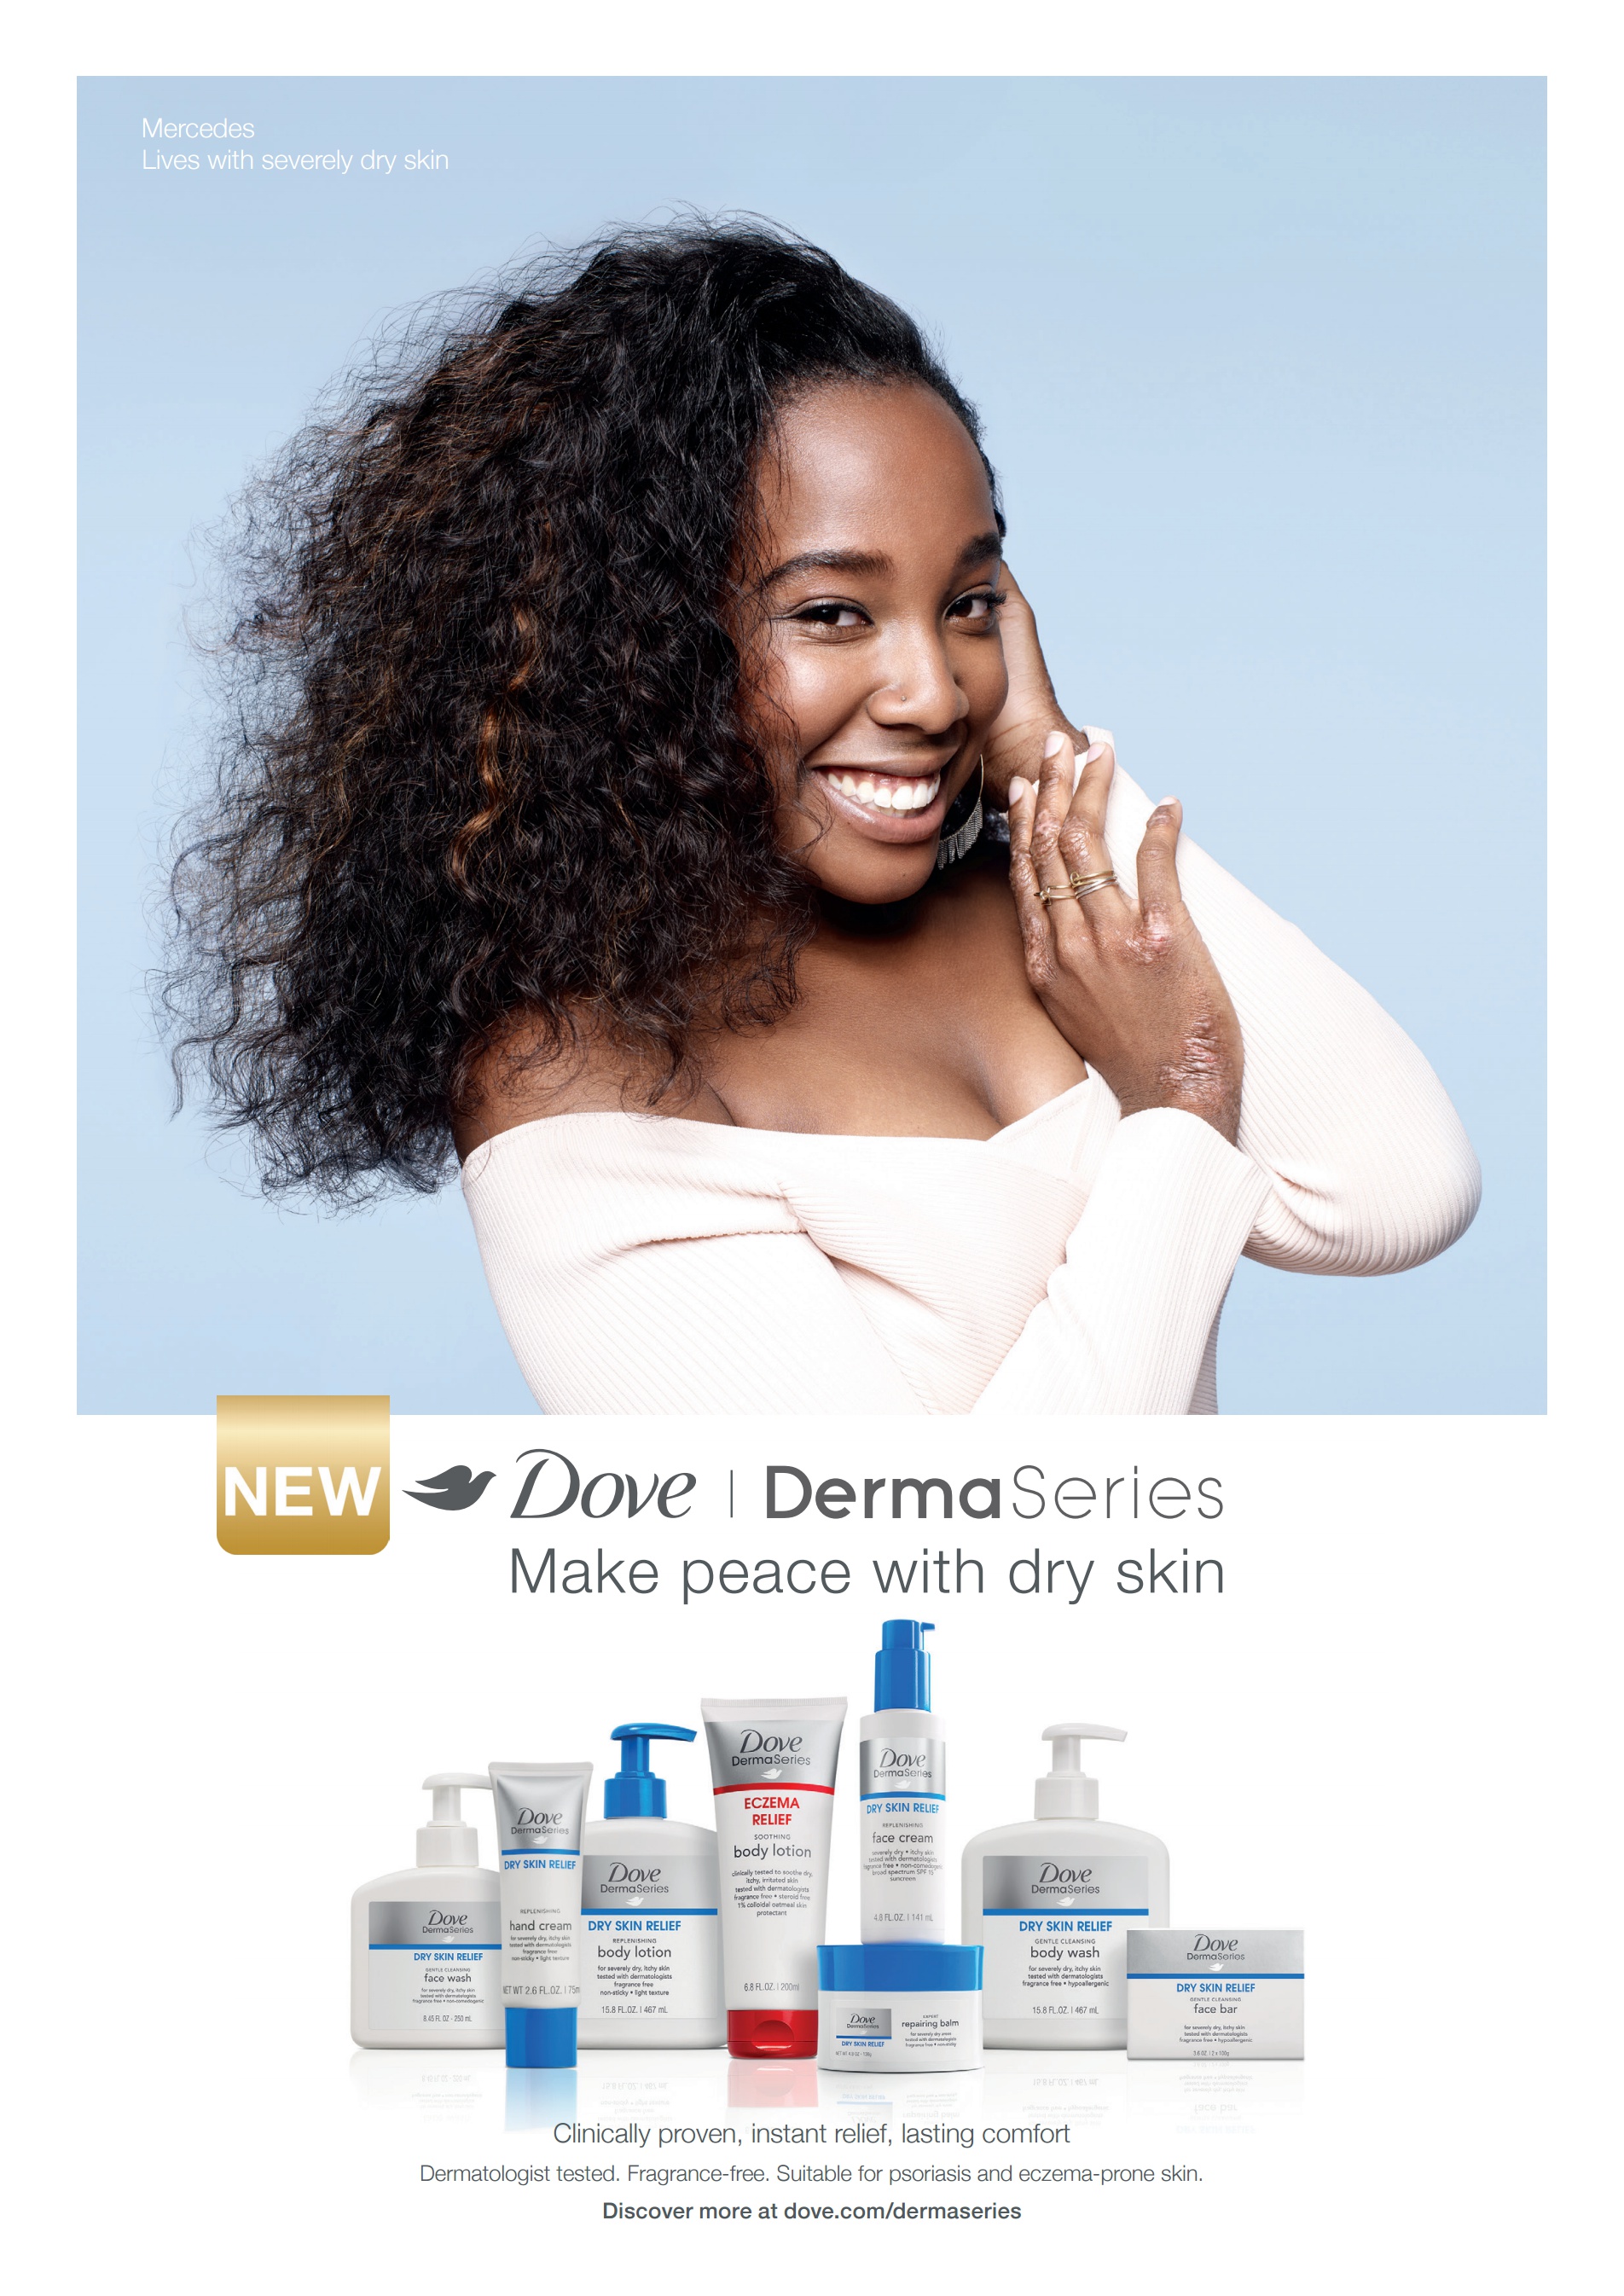 Mercedes from Dove DermaSeries campaign